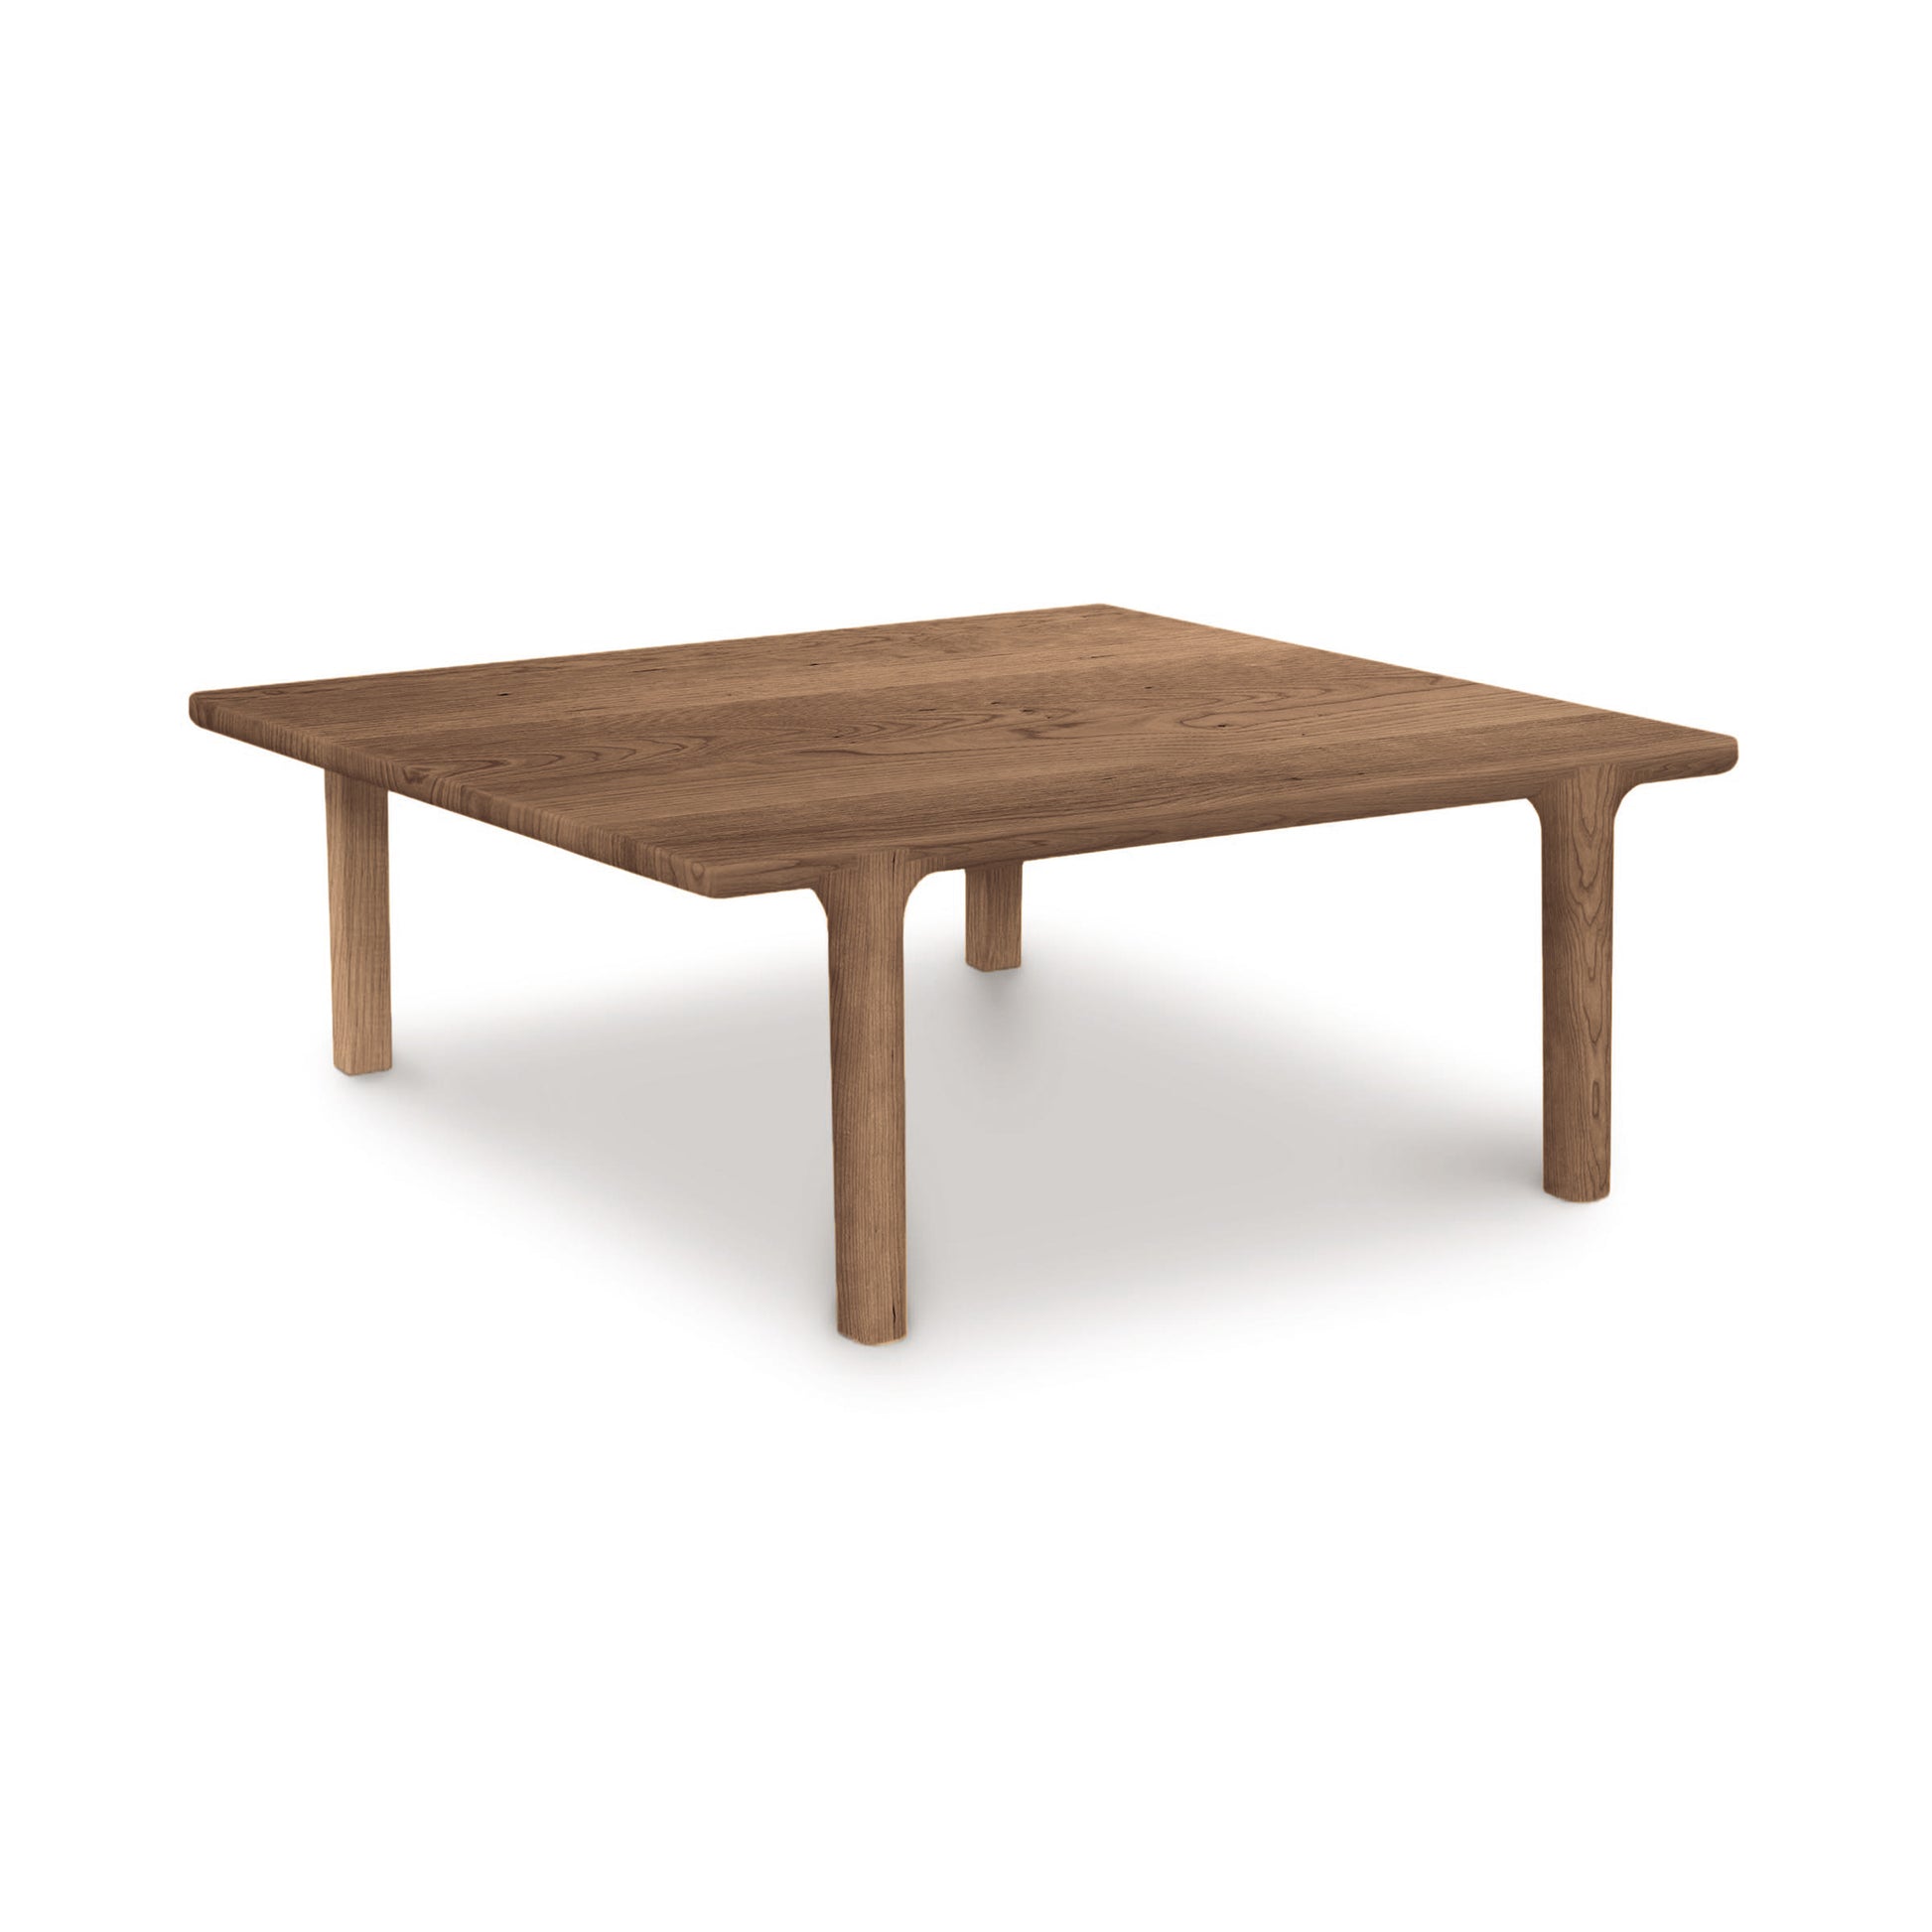 A Sierra Square Coffee Table by Copeland Furniture with two legs on a white background.